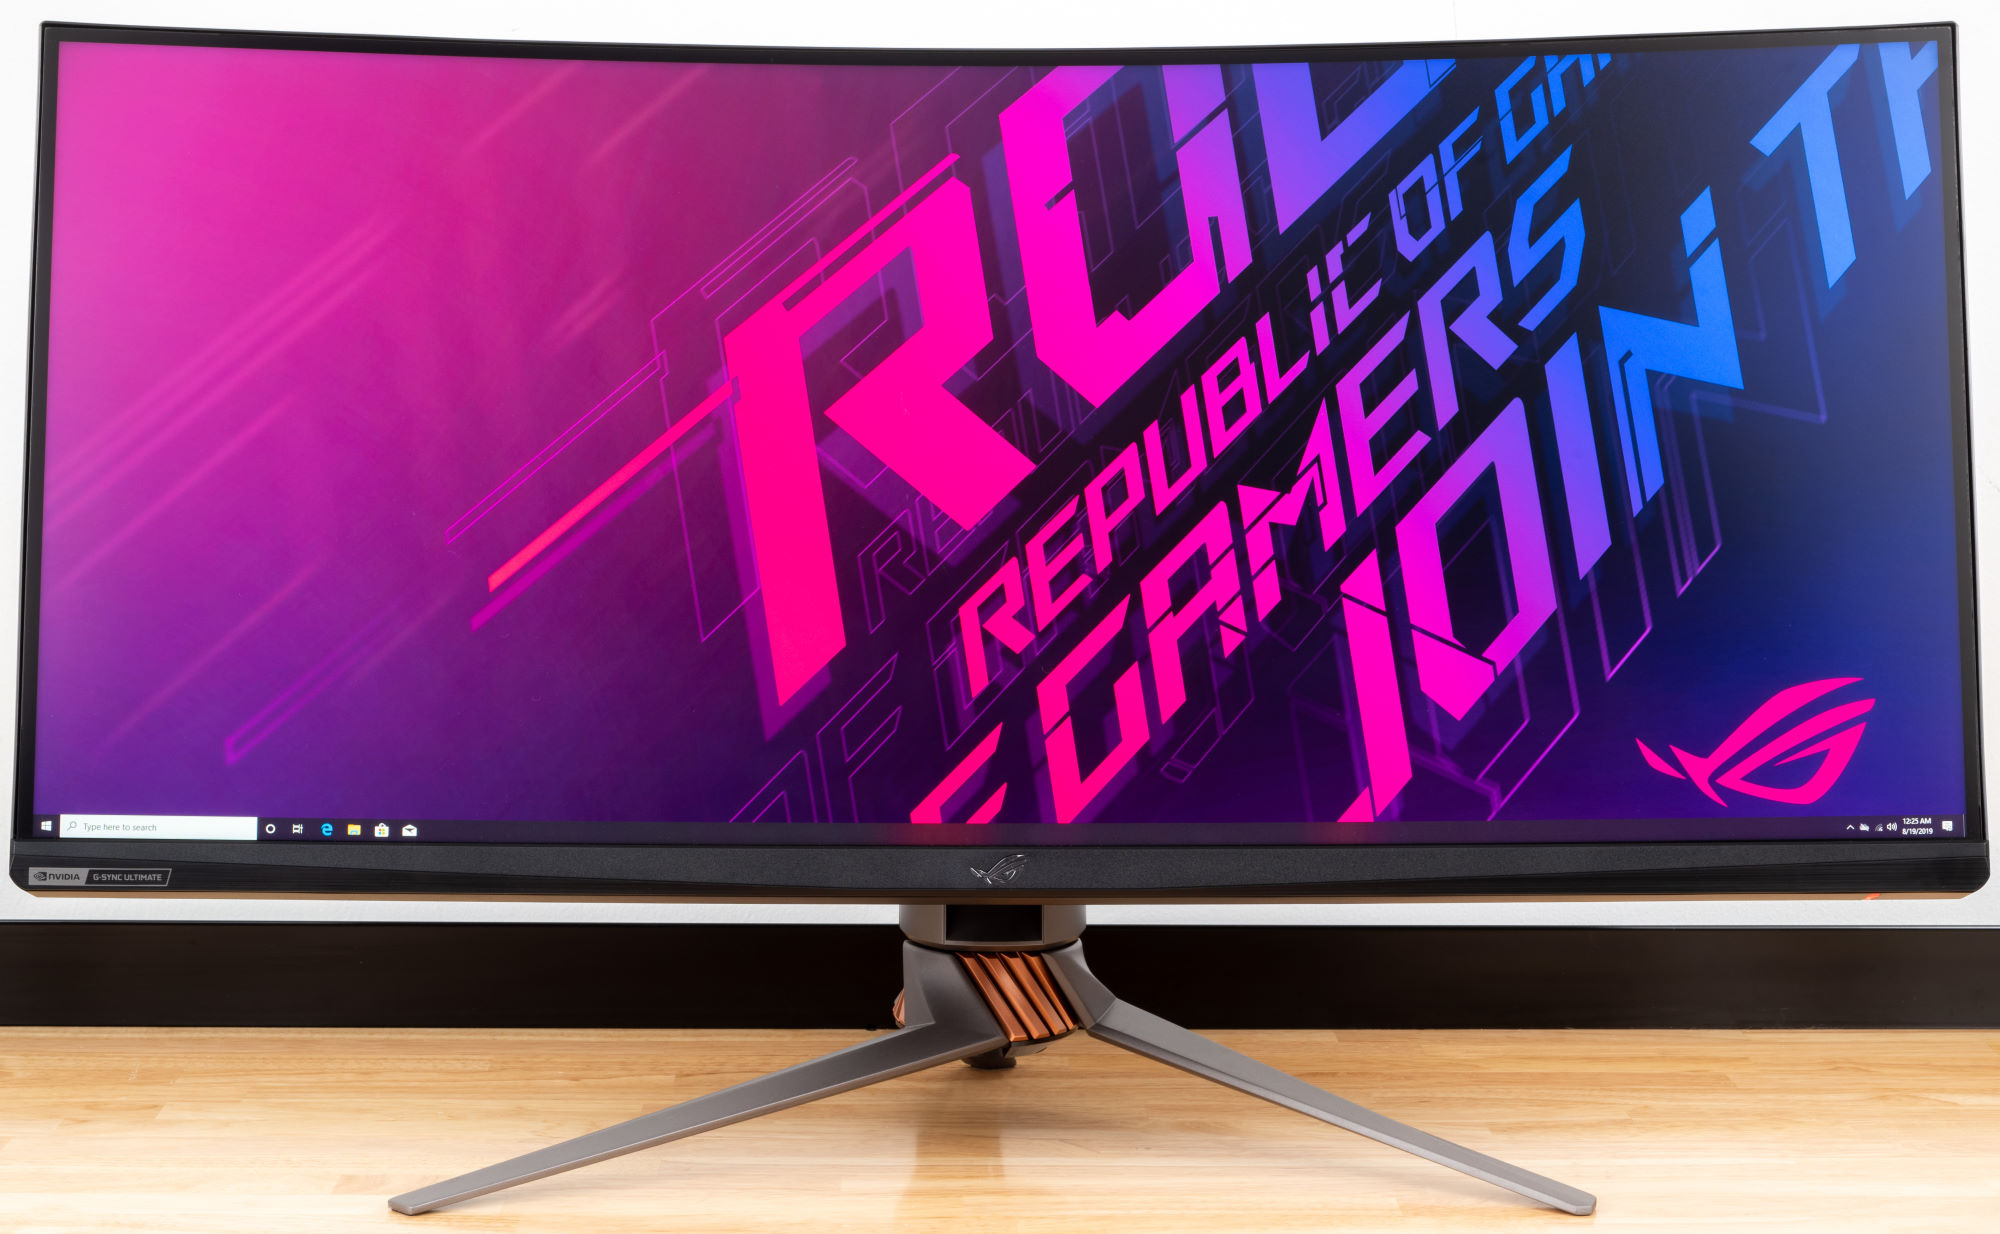 The ROG Swift PG35VQ elevates every game with an ultrawide HDR canvas